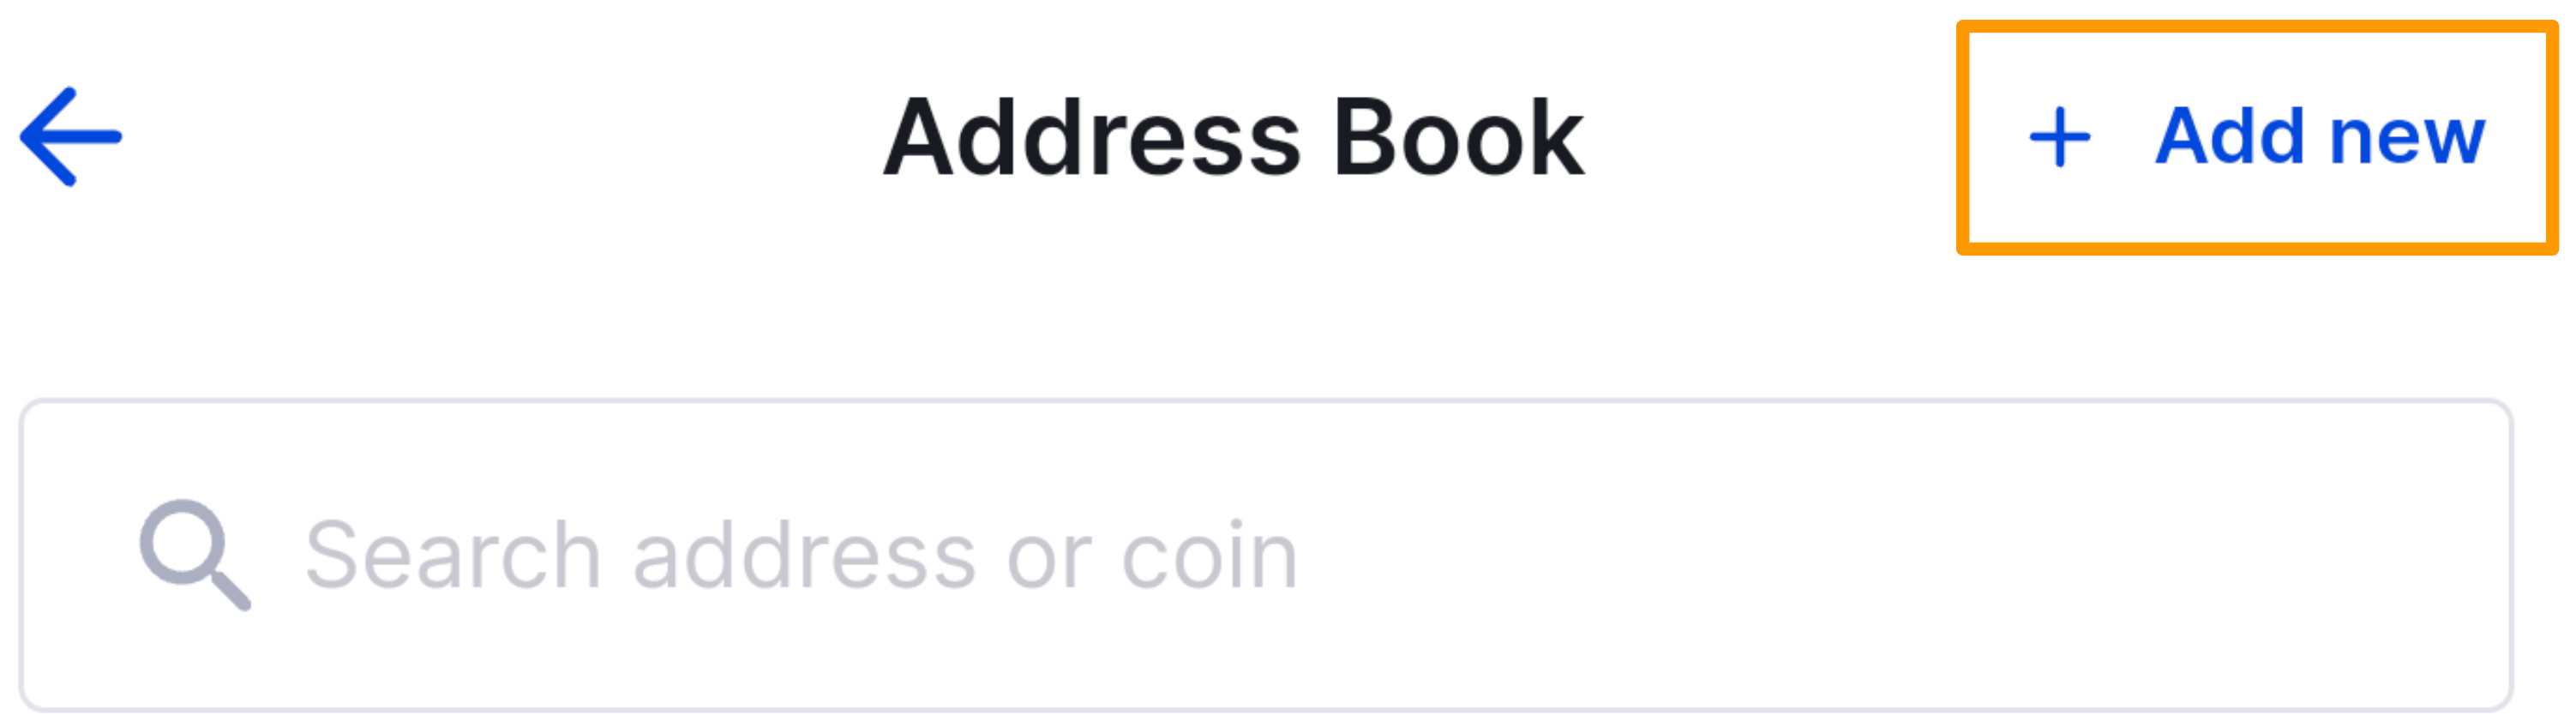 CoinSpot Mobile App - How to save your wallet addresses - Figure 3.png